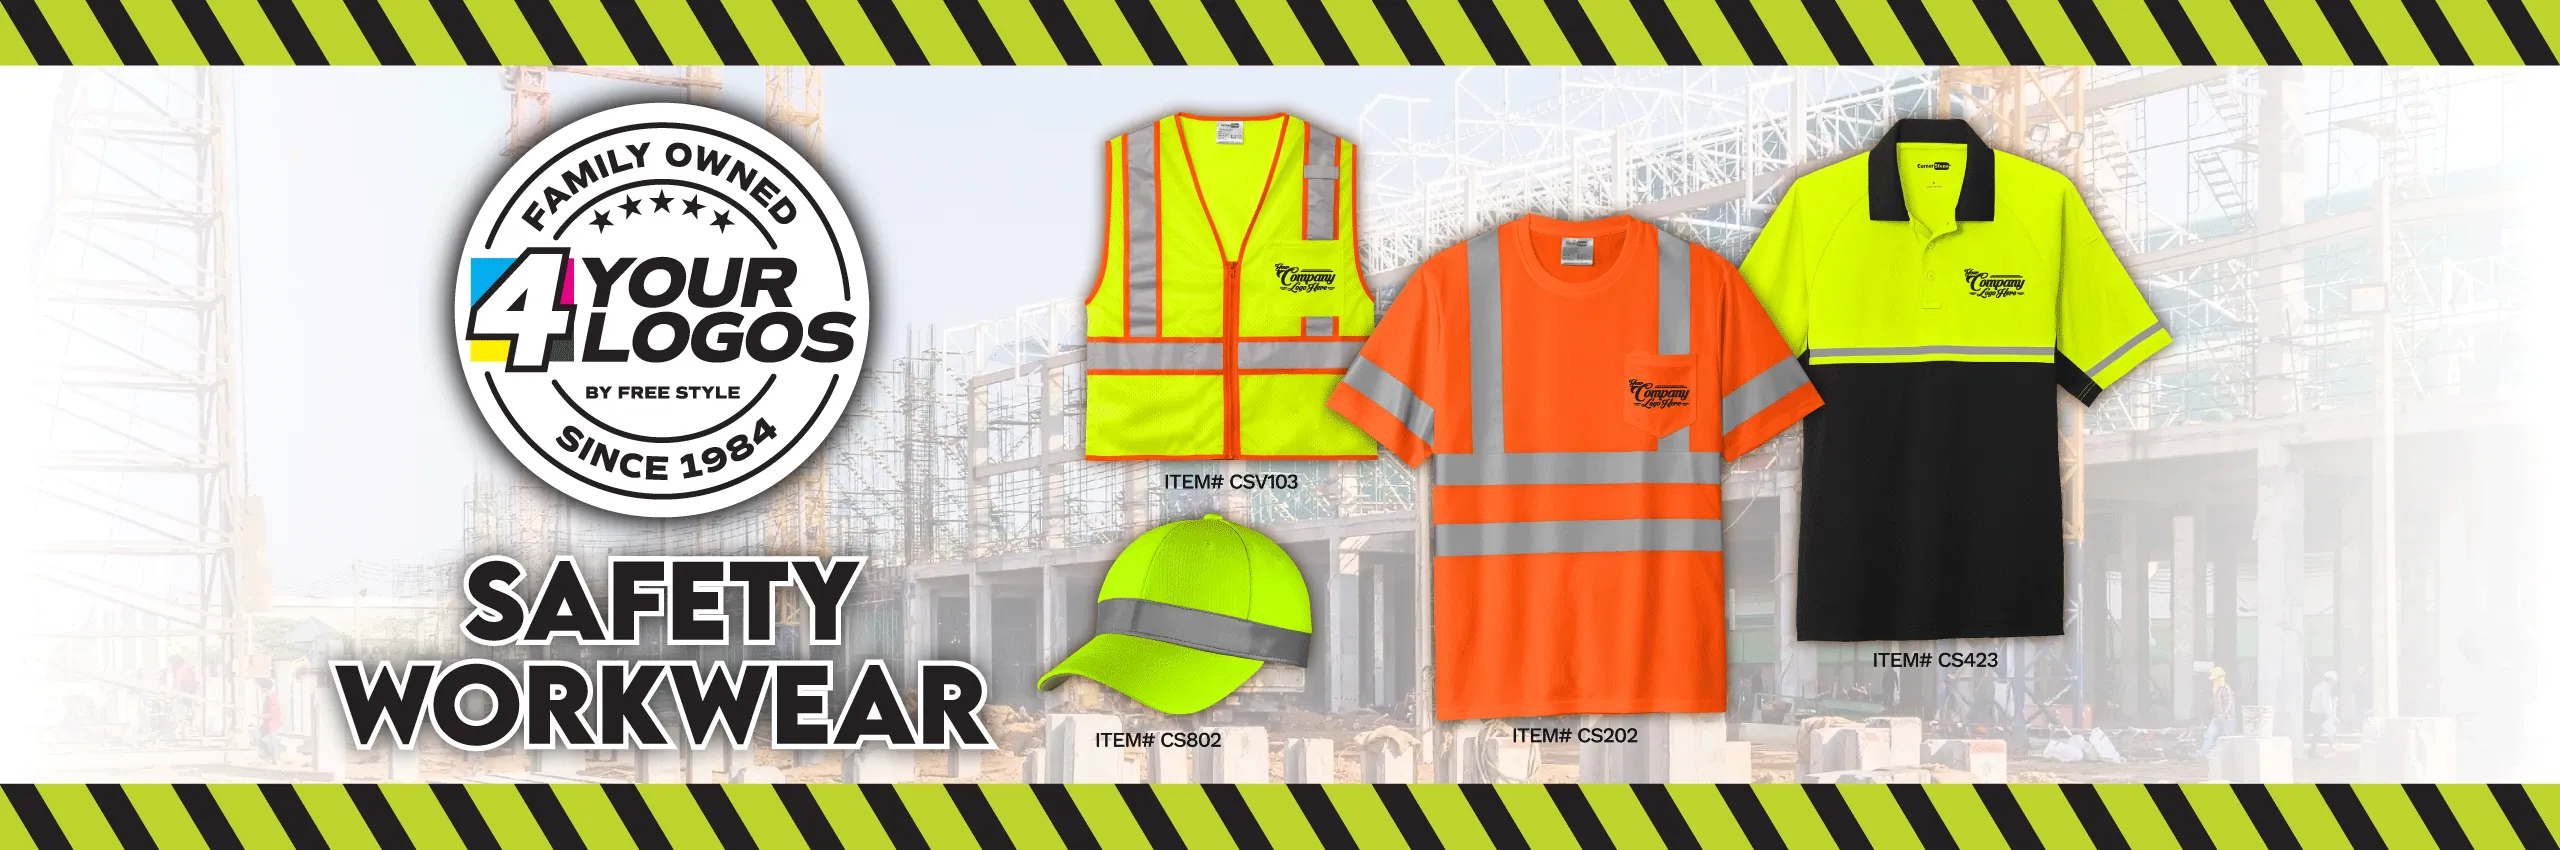 Safety Workwear and anything else you need we have